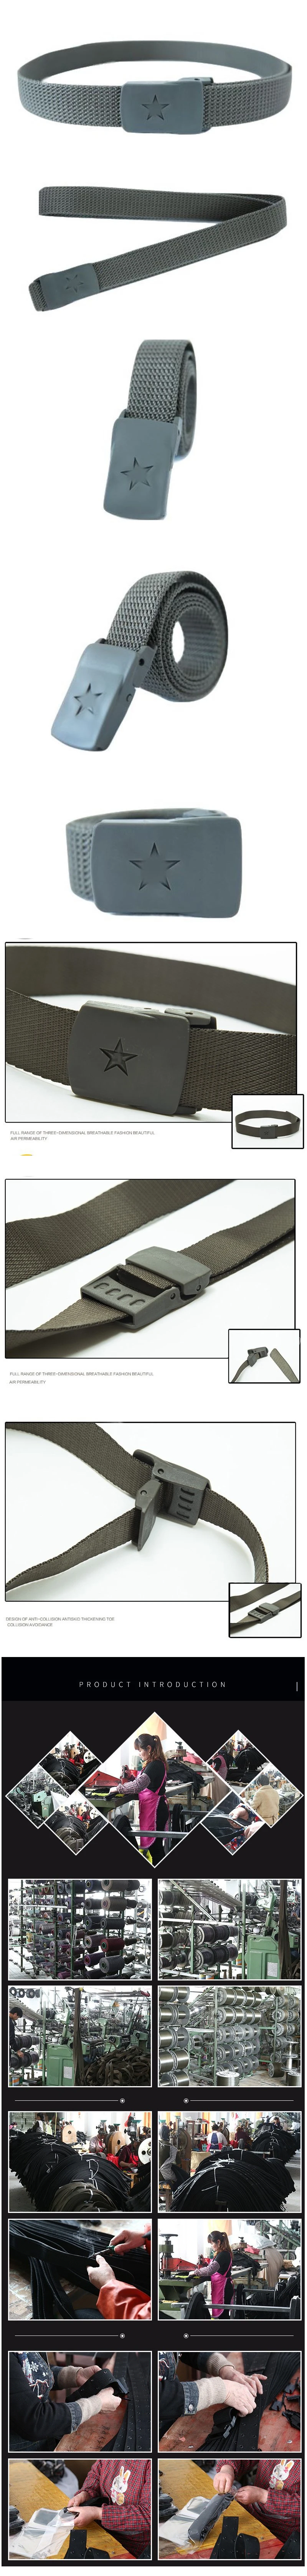 Military Training Braided Inner Belt Security Training Tactical Armed Belt Lengthened